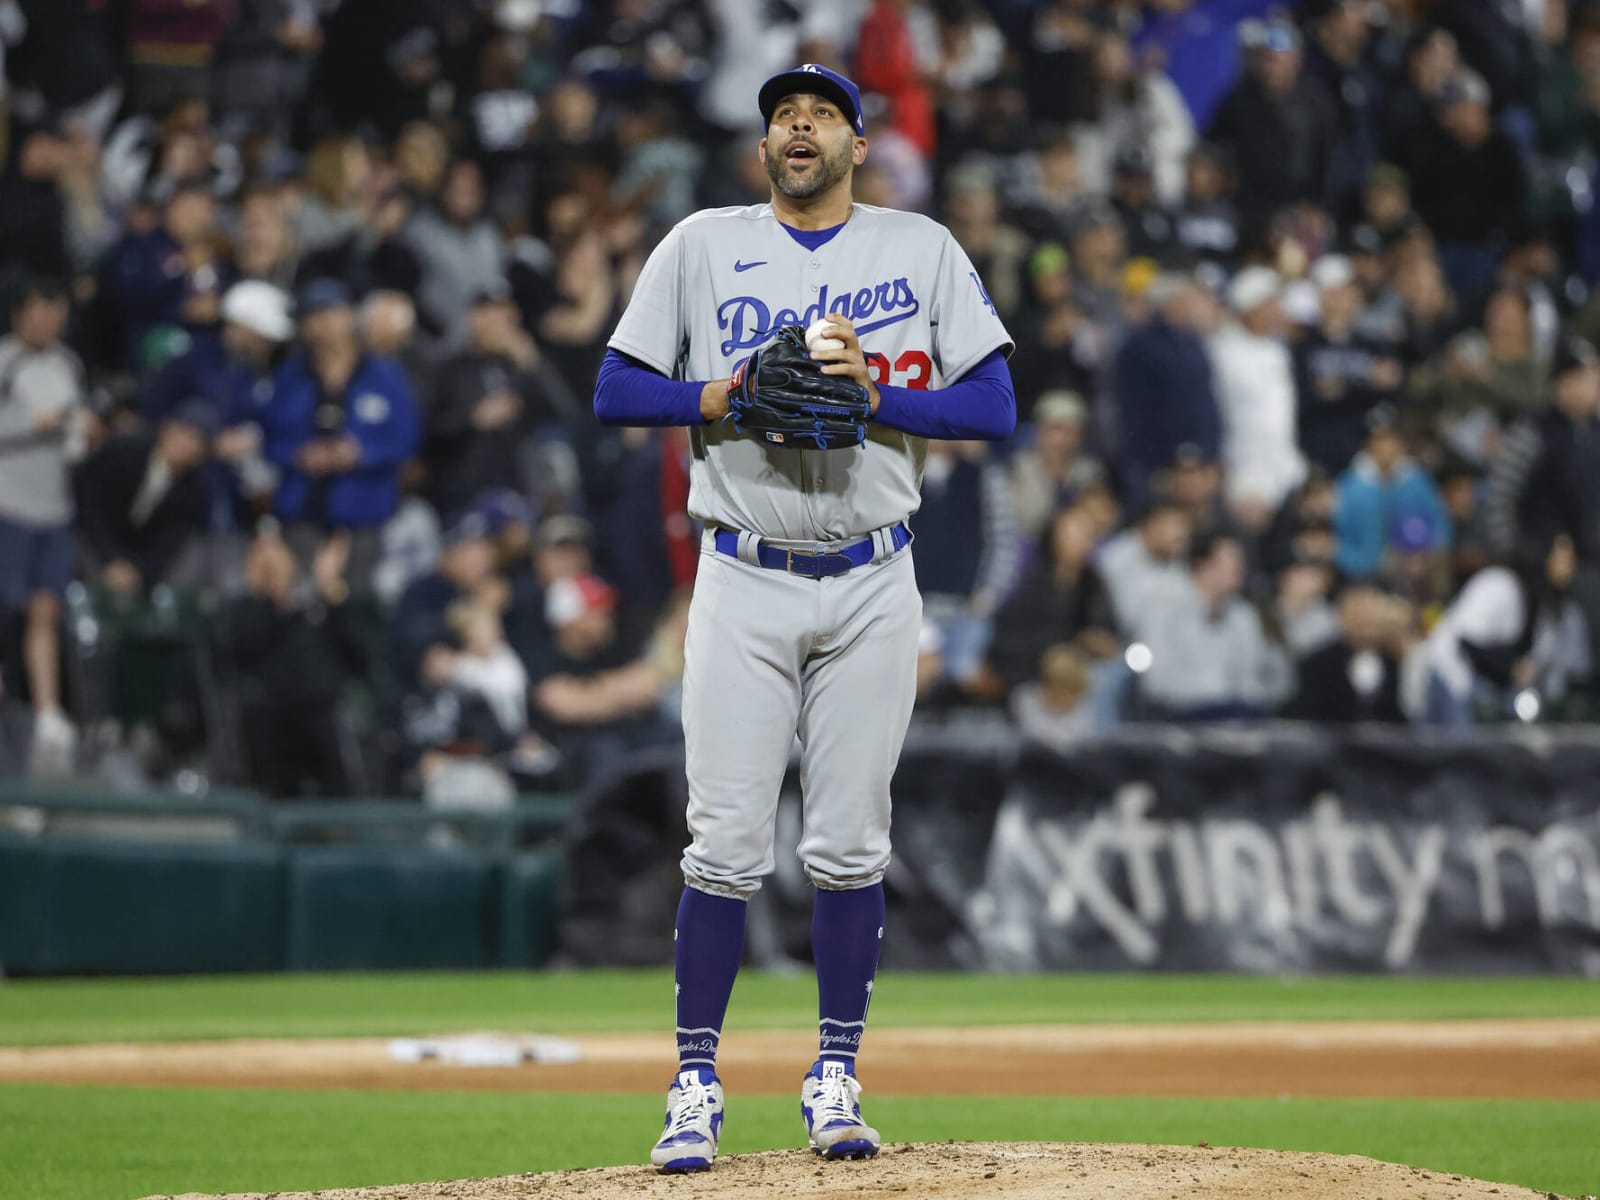 Report: Dodgers Pitcher David Price Paying $1,000 Of His Own Money